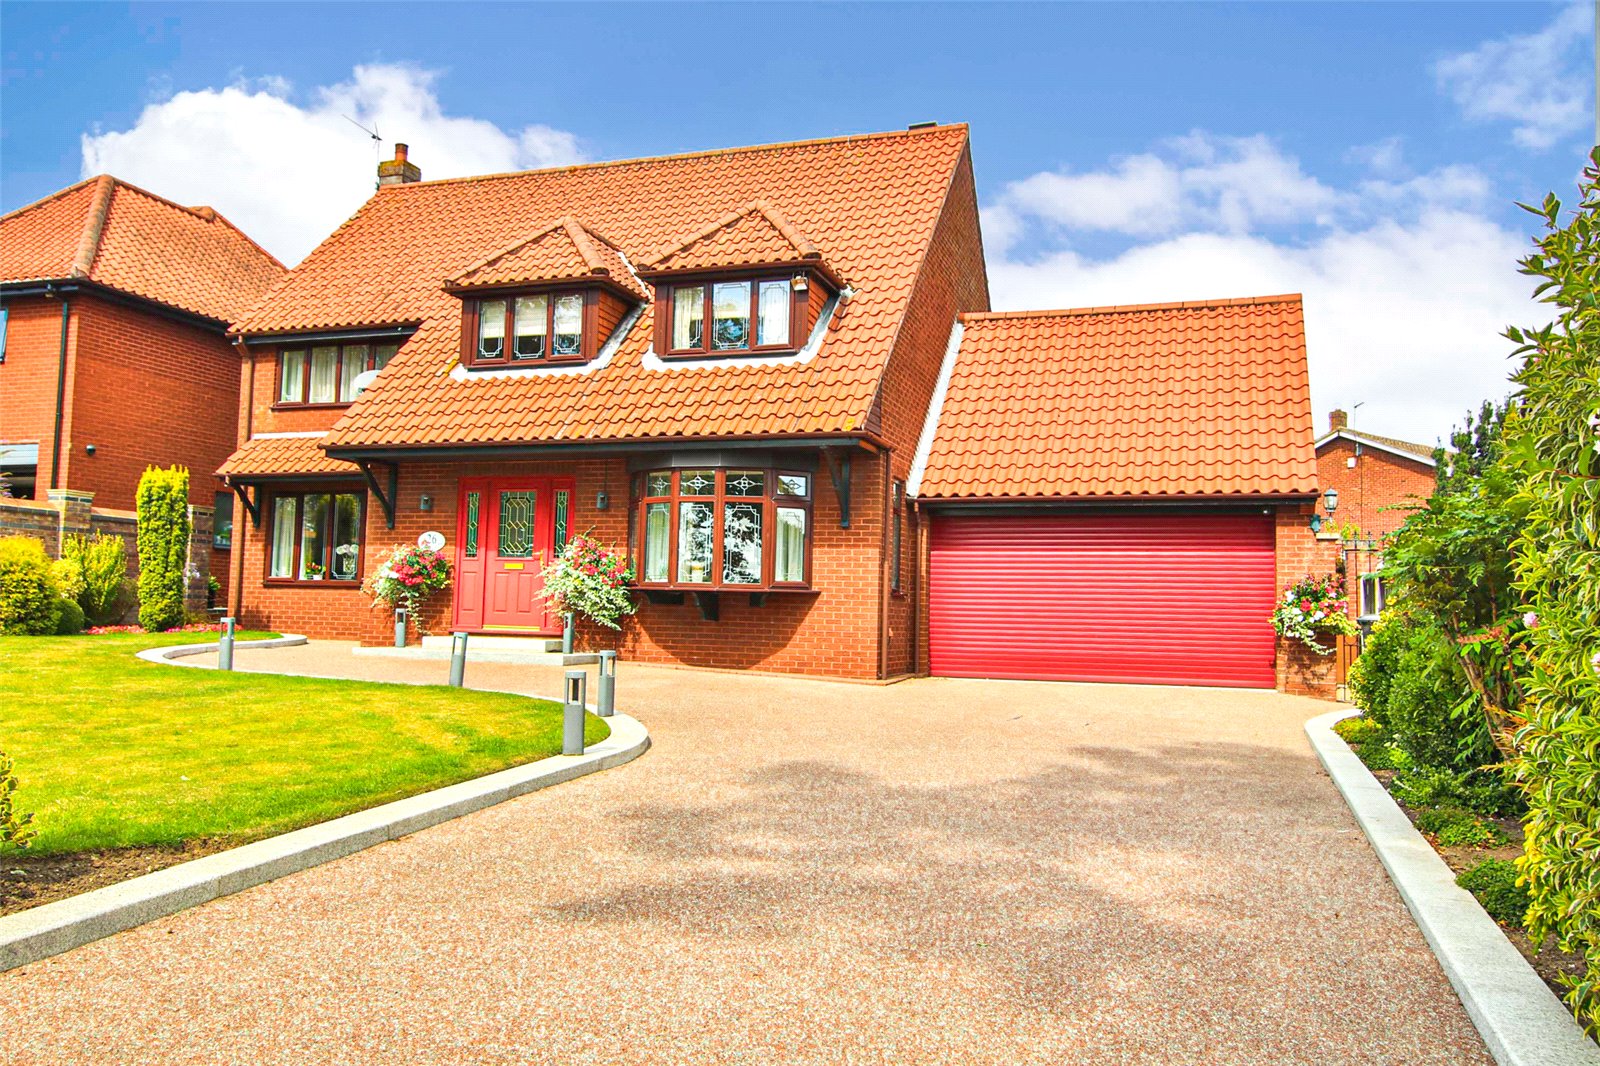 4 bed house for sale in Horkstow Road, Barton-upon-Humber, DN18